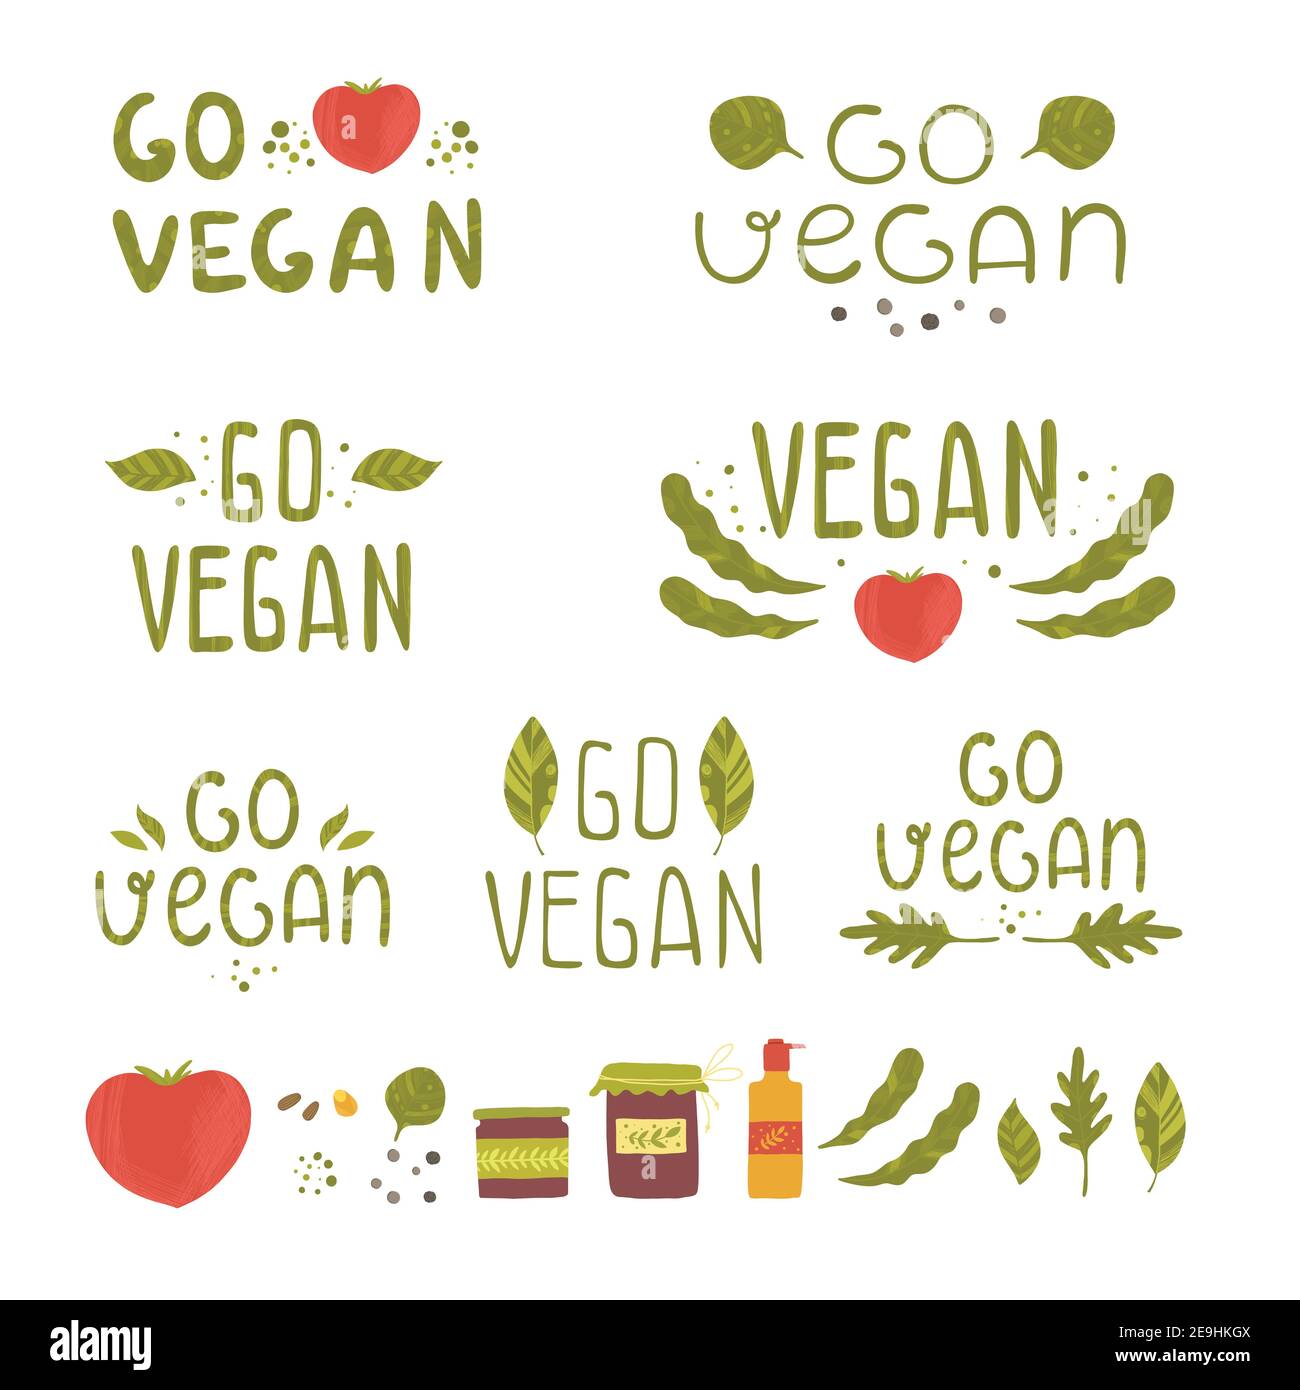 Vegan product labels. Suitable for ads, signboards, packaging and identity and web designs. Vegan. Go vegan. Green living. Fresh products Stock Vector